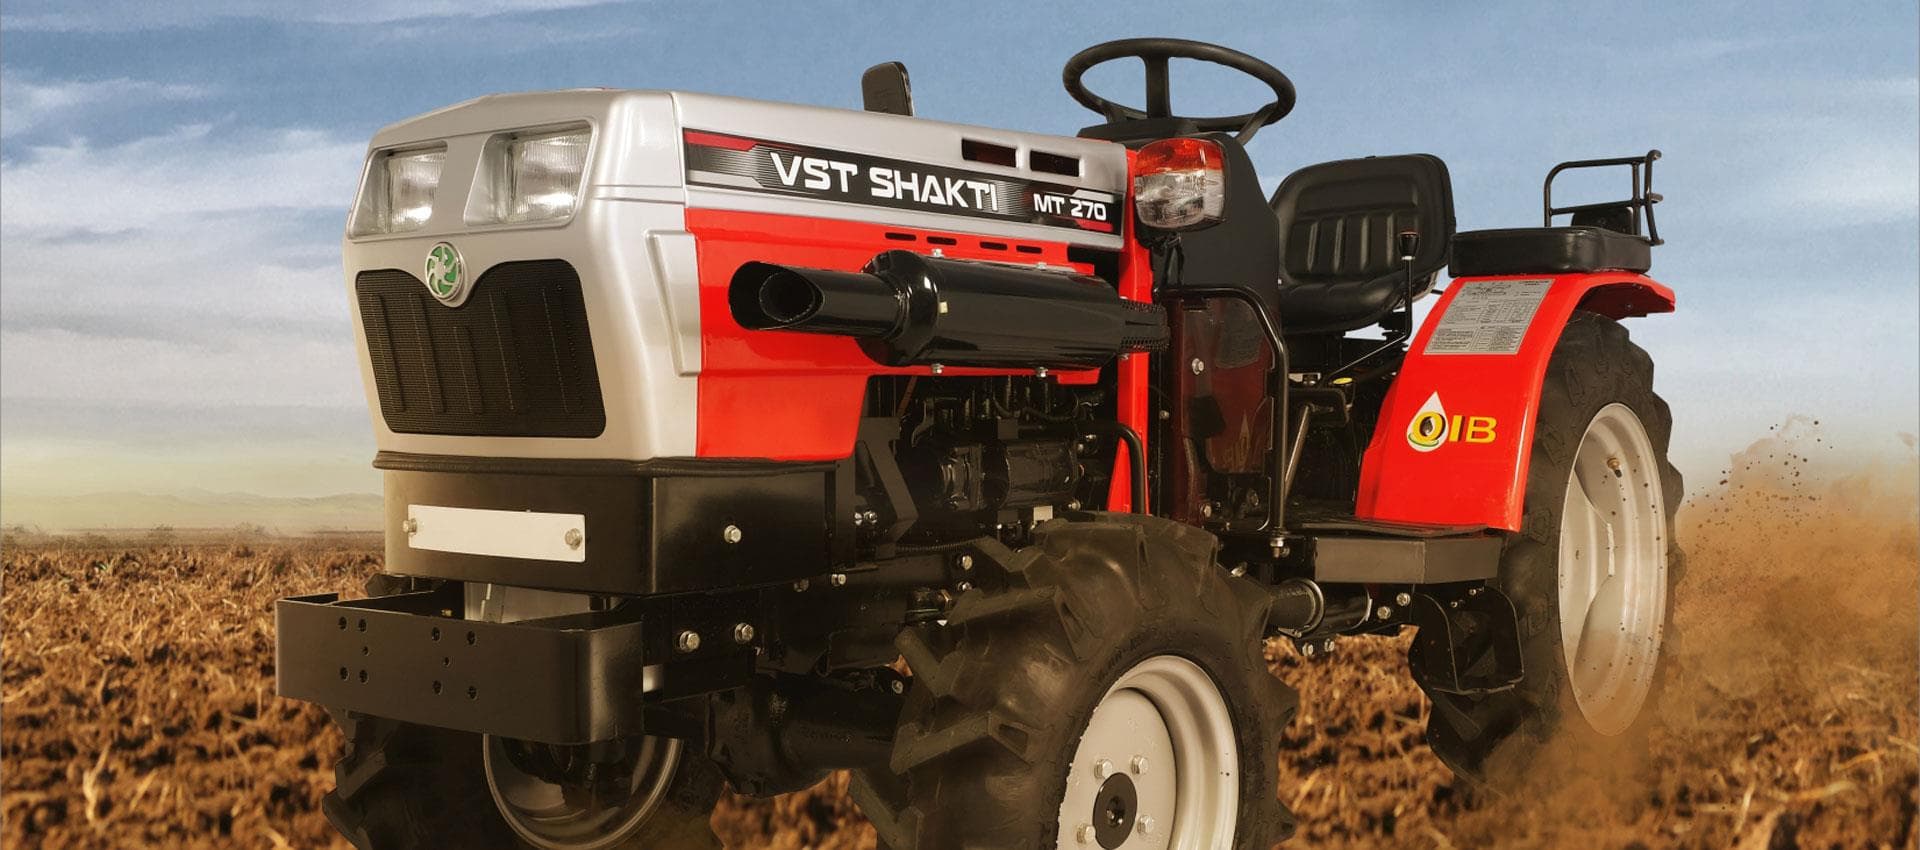 VST Saw 36.33% Tillers Tractors Sales Increase in May 2022